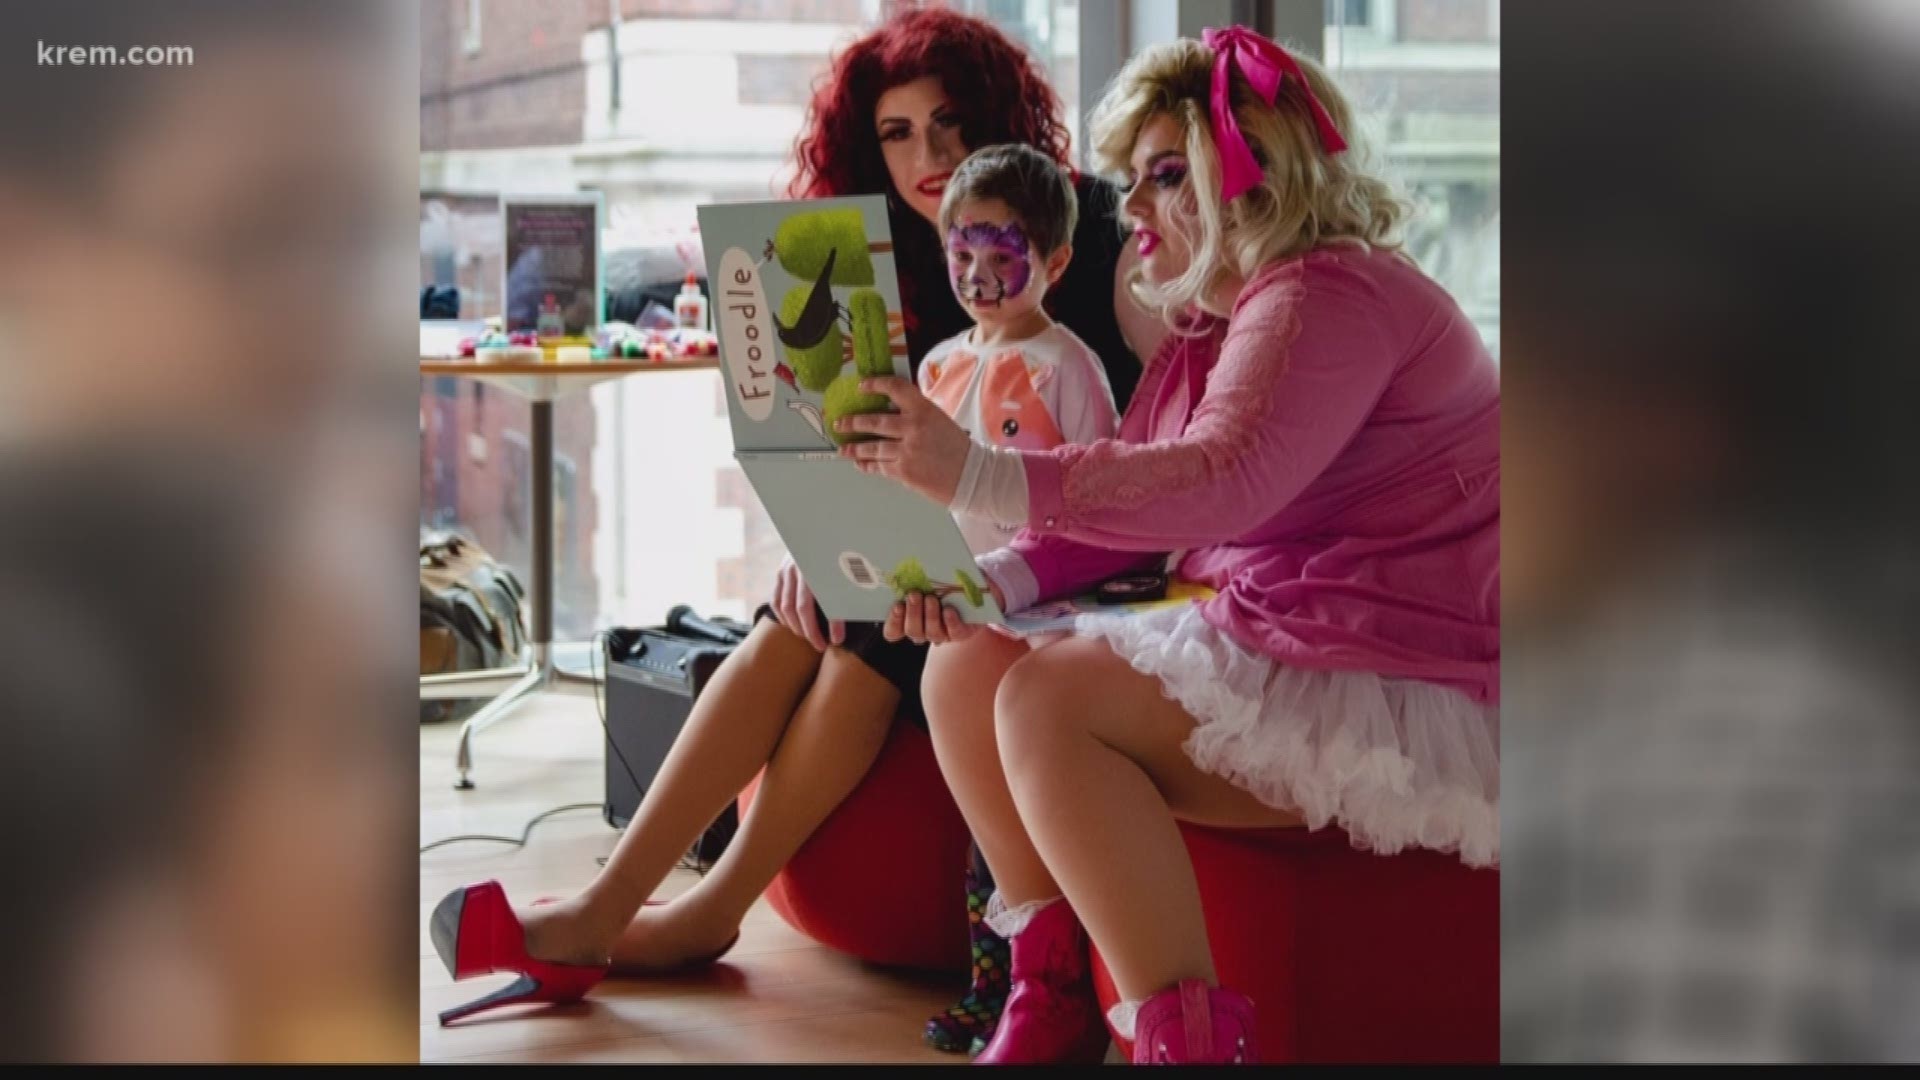 A planned "Drag Queen Story Hour" at Spokane's Public Libraries is creating some buzz tonight. It's a reading event for kids with drag queens. The library says it's set to line up with Pride Month in June and celebrate diversity.